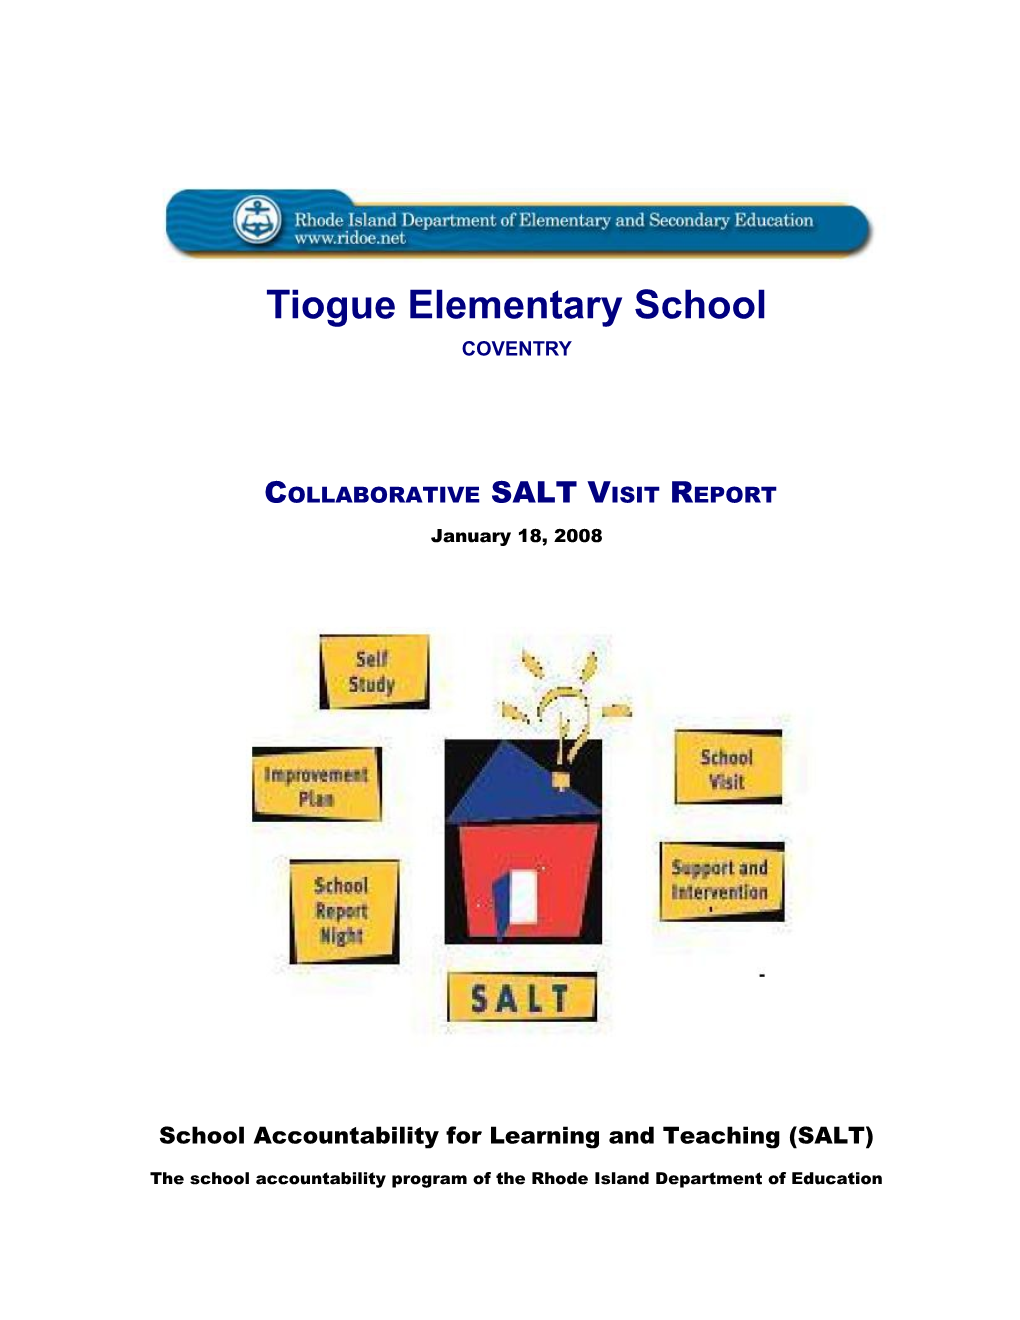 School Accountability for Learning and Teaching (SALT) s2